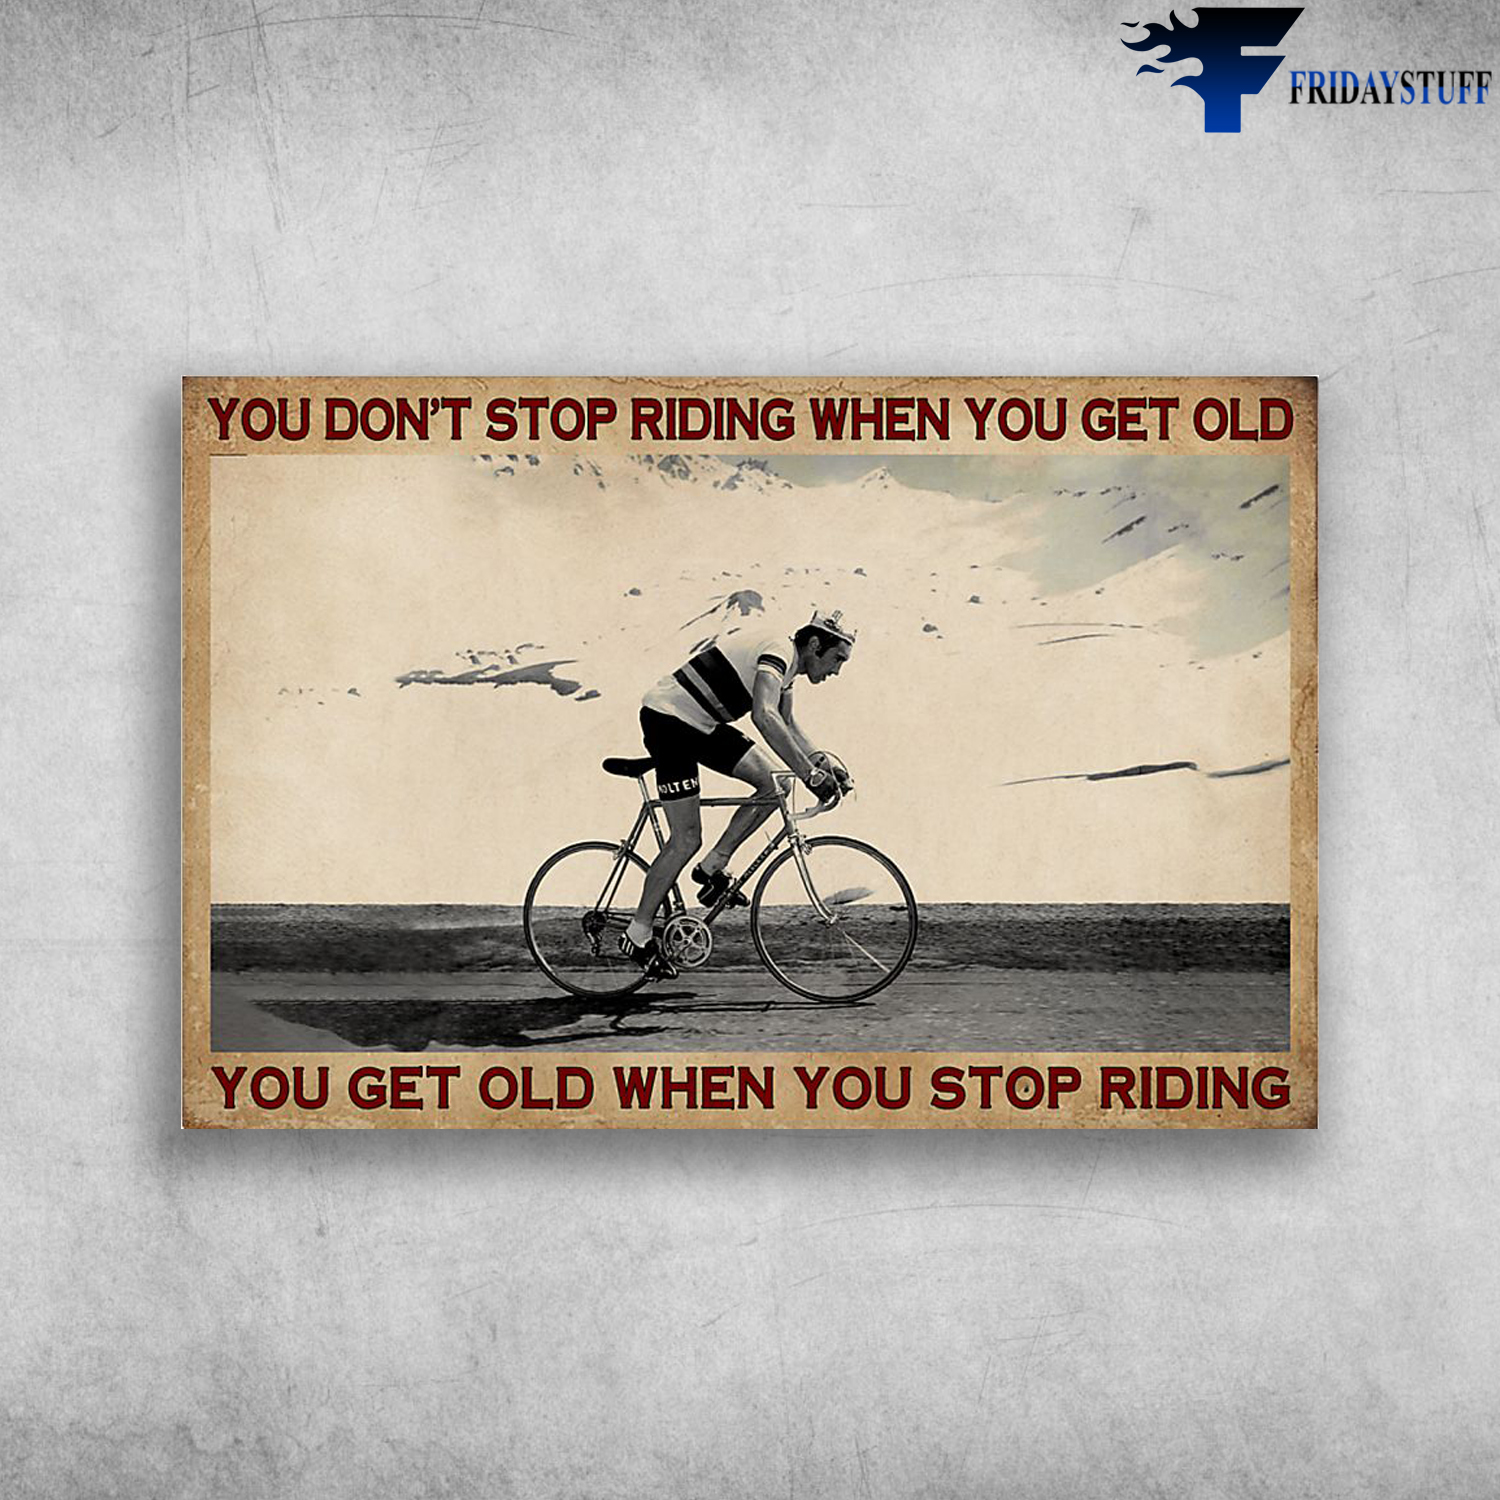 Man Riding Bicycle - You Don't Stop Riding When You Get Old, You Get Old When You Stop Riding